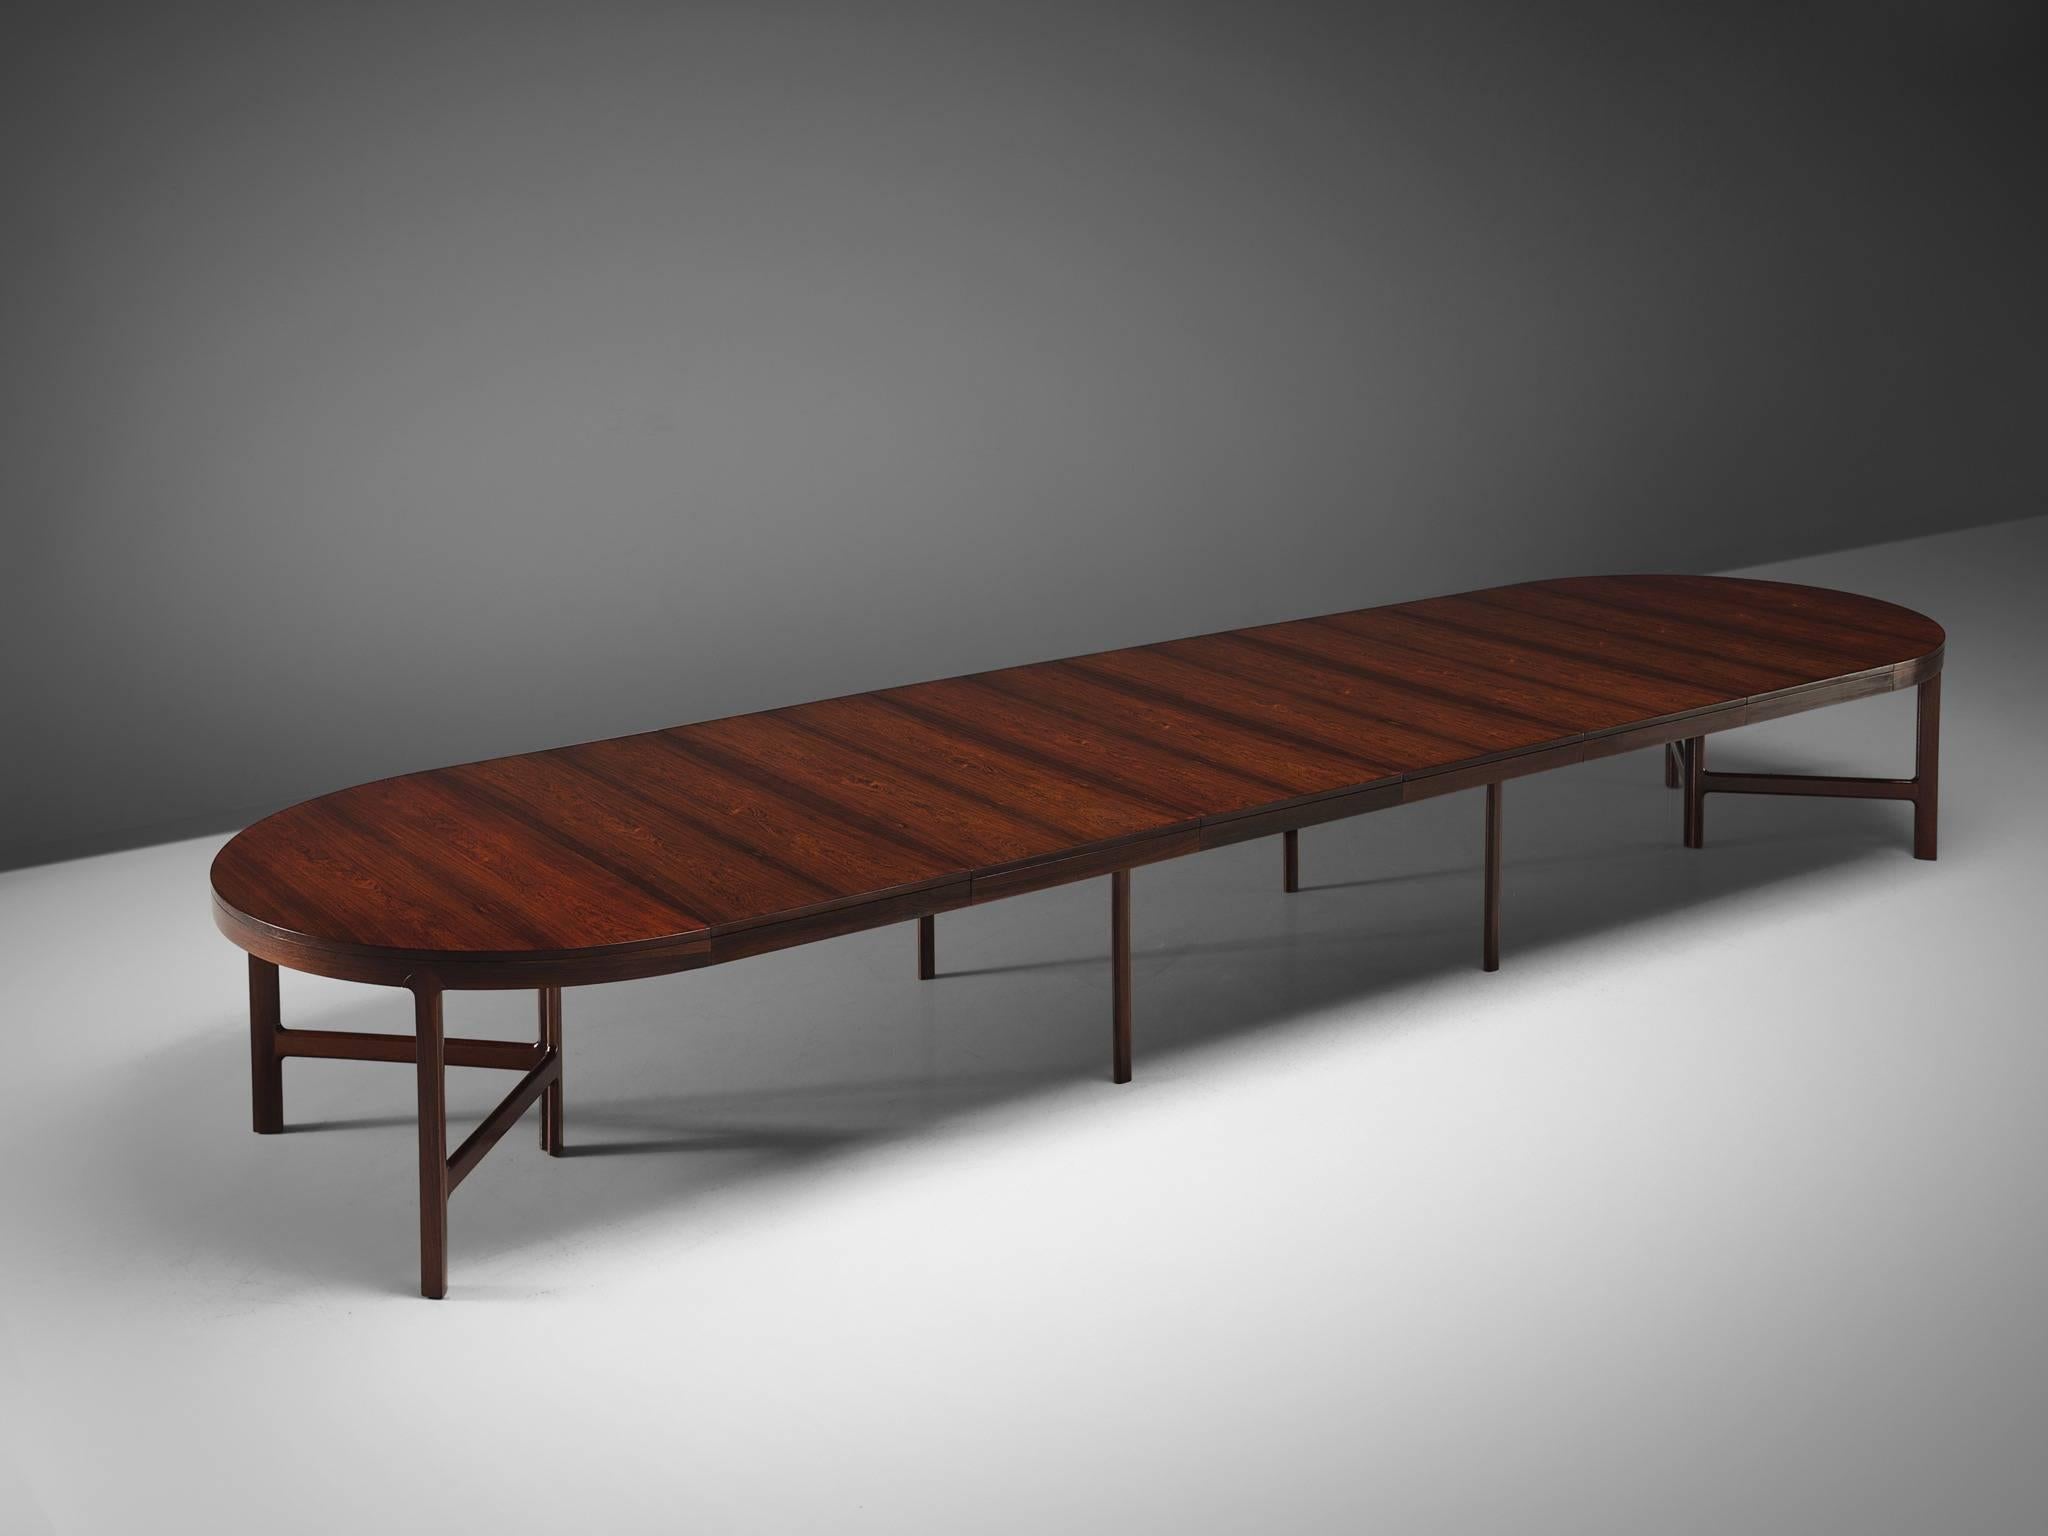 Danish cabinet maker, rosewood, Denmark, 1960s

Very large oval dining table with two tripod legs on each side and four legs in the middle. The grain of the rosewood and the exceptional length make this into a luxurious, probably custom-made